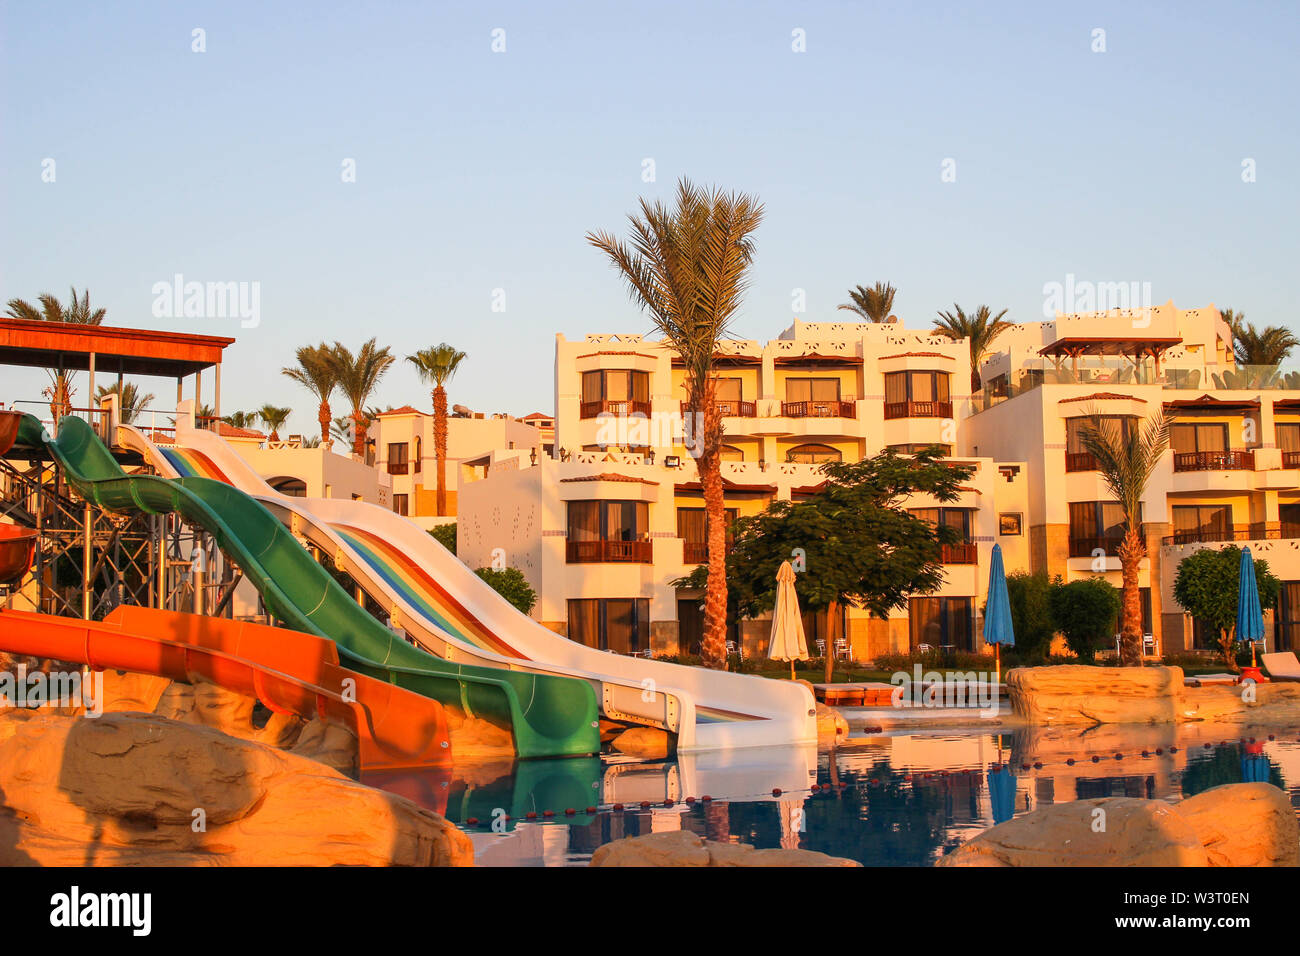 Water colorful rainbow slides with swimming pool in the hotel at dawn in Egypt. Water sport intertainment Stock Photo